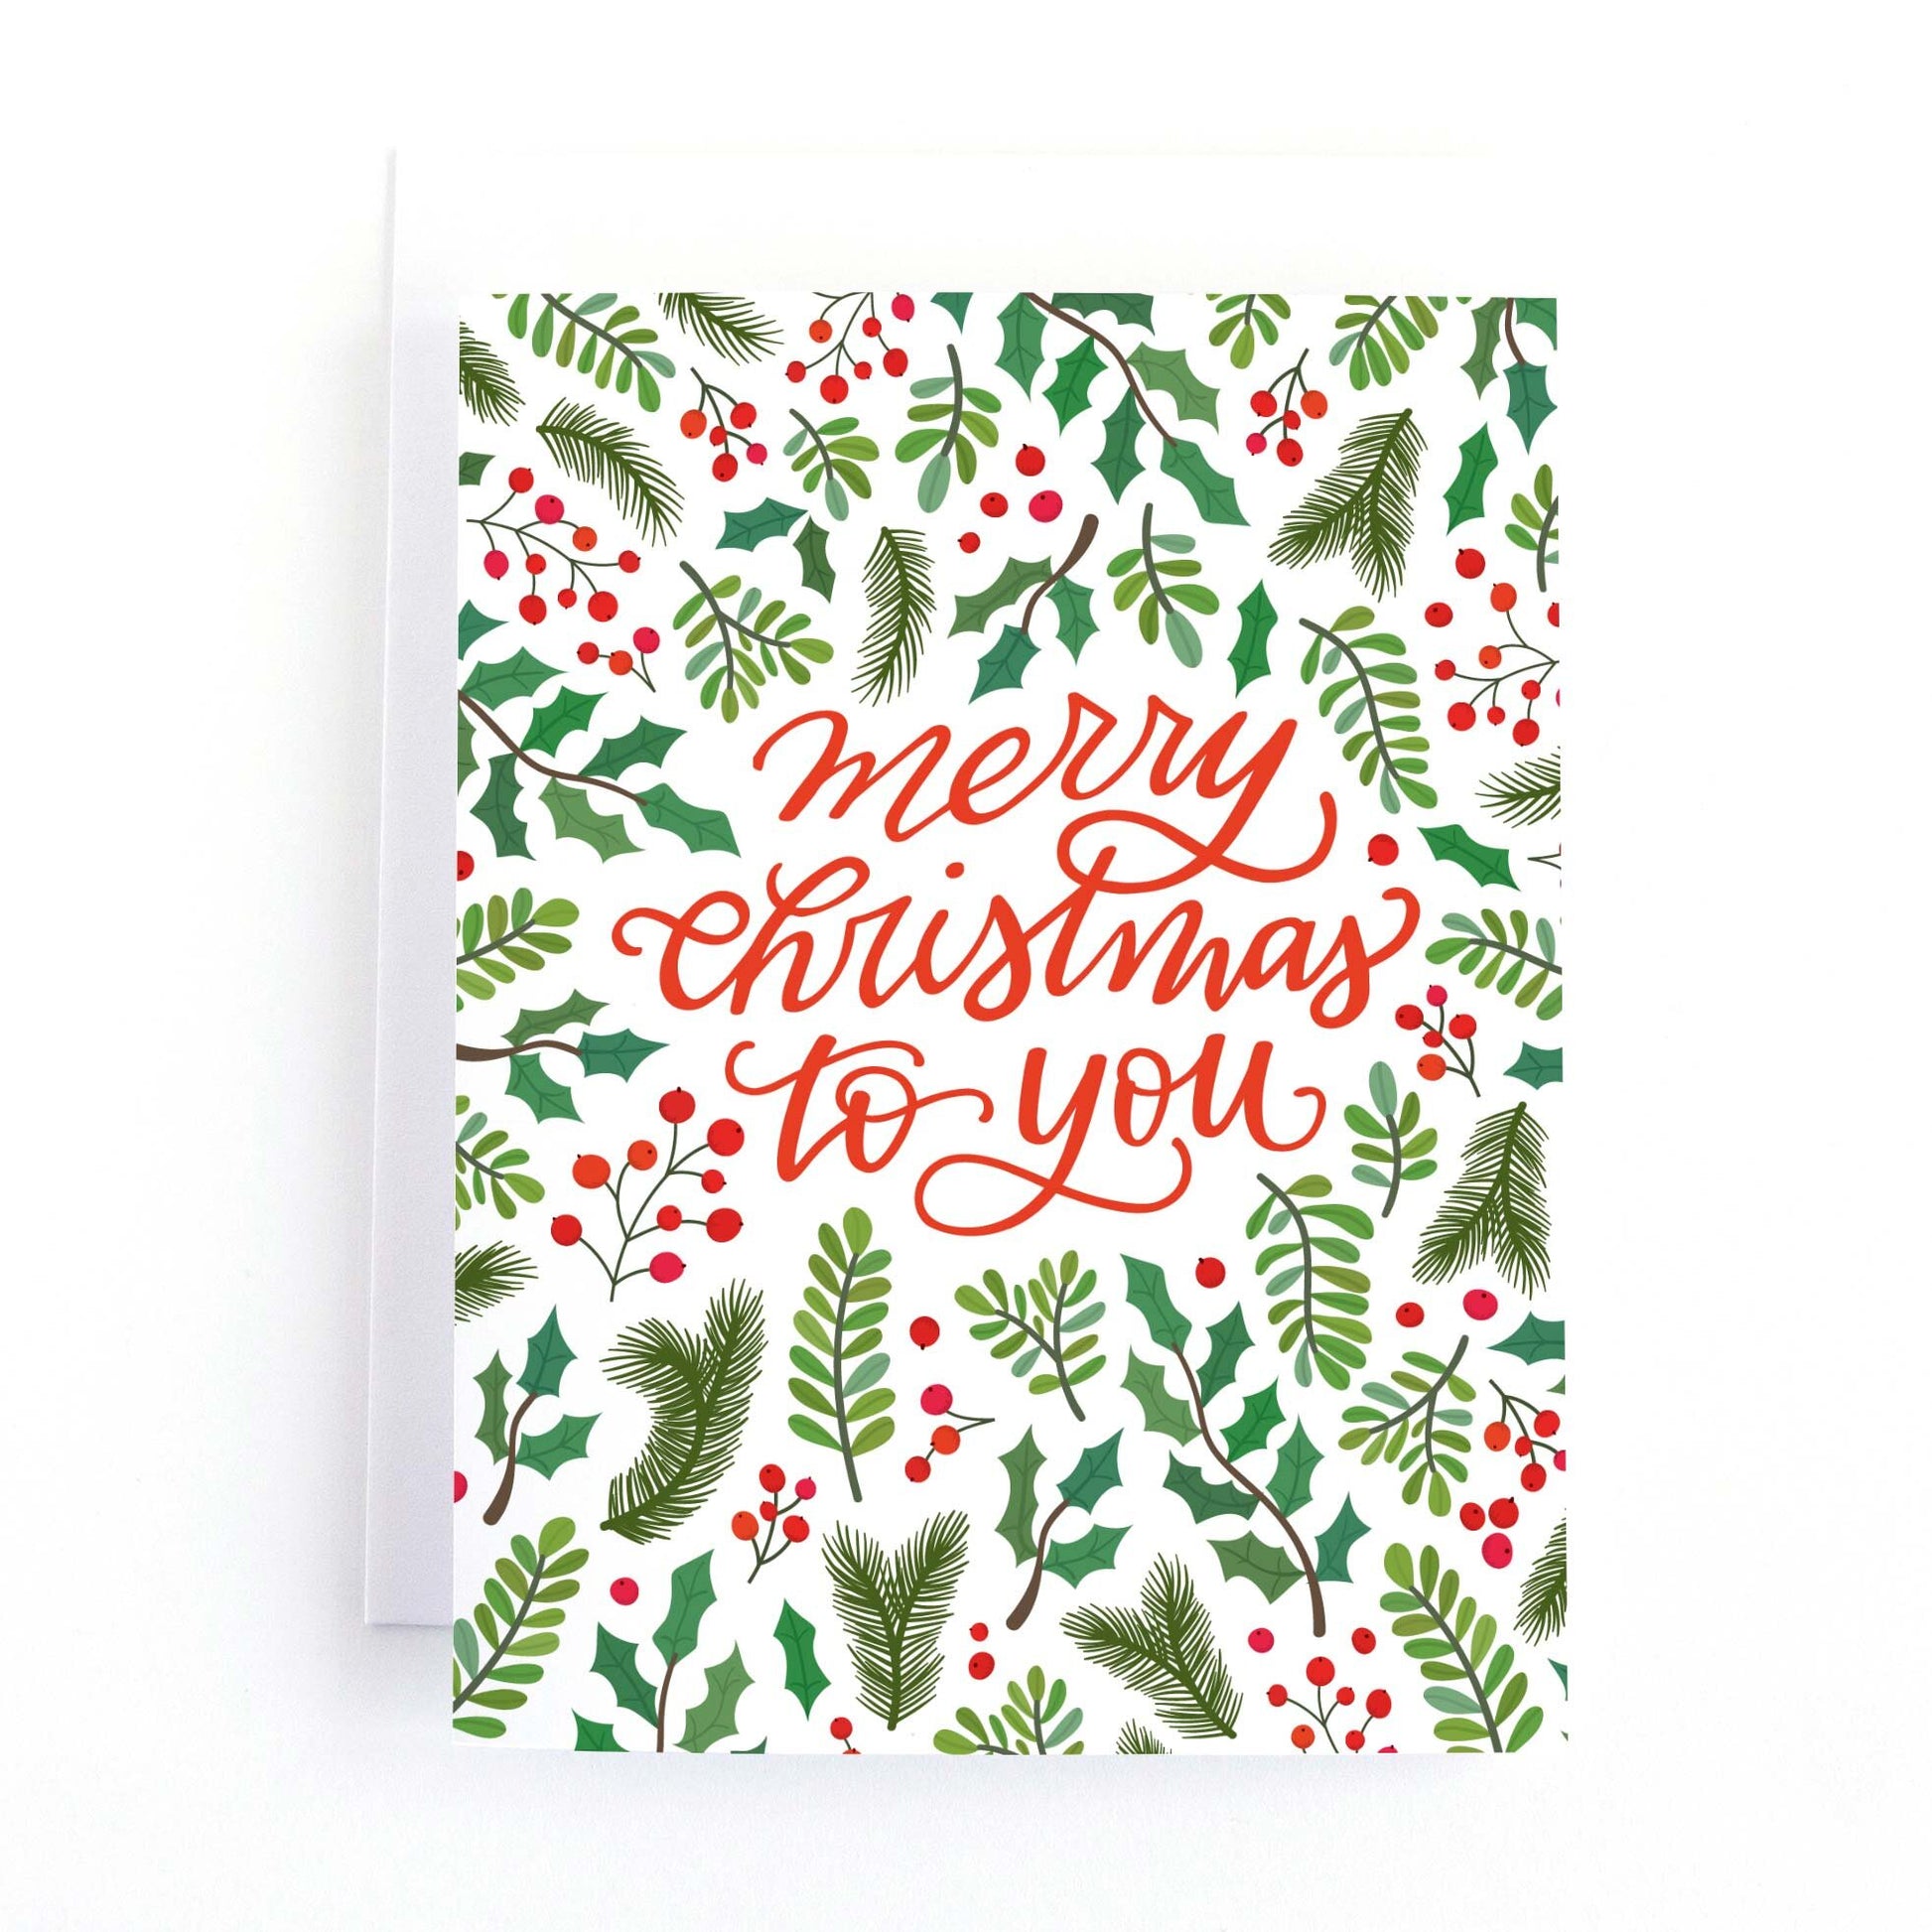 Christmas holiday greeting card with greenery, holly and berries and a hand lettered greenery